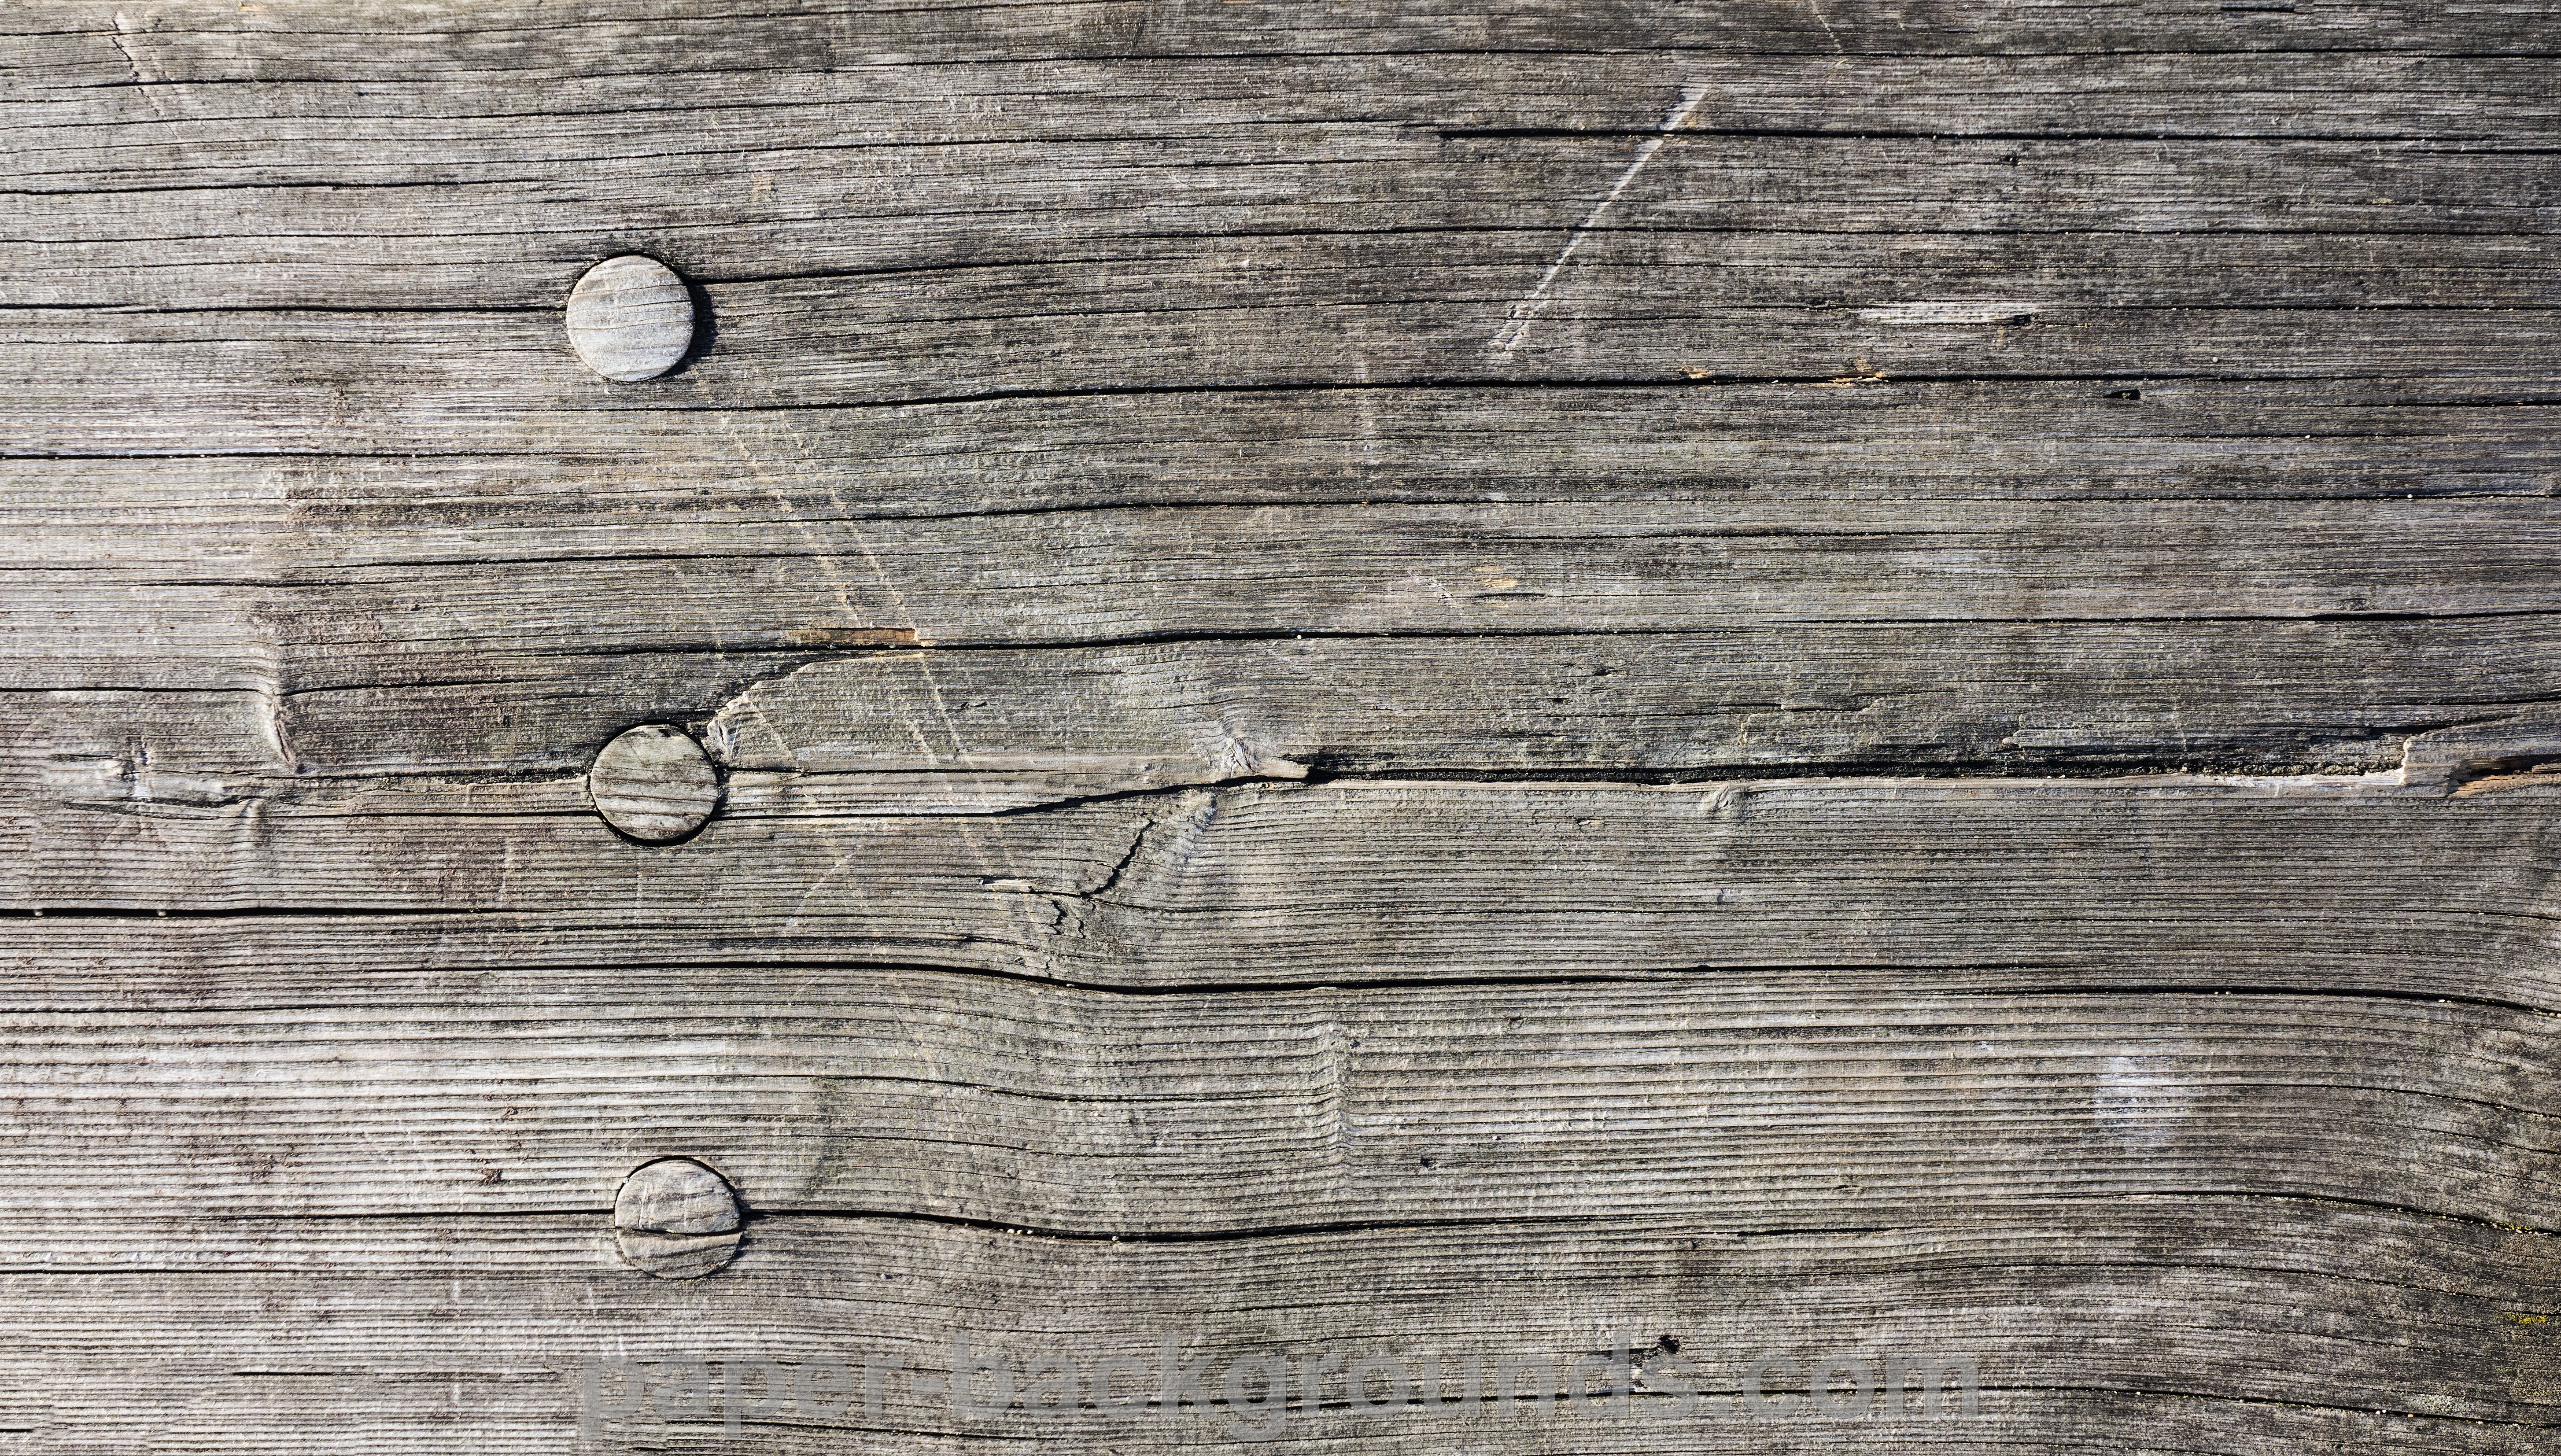 Old Wood Board Texture High Resolution 5816 x 3307 pixels Large JPG